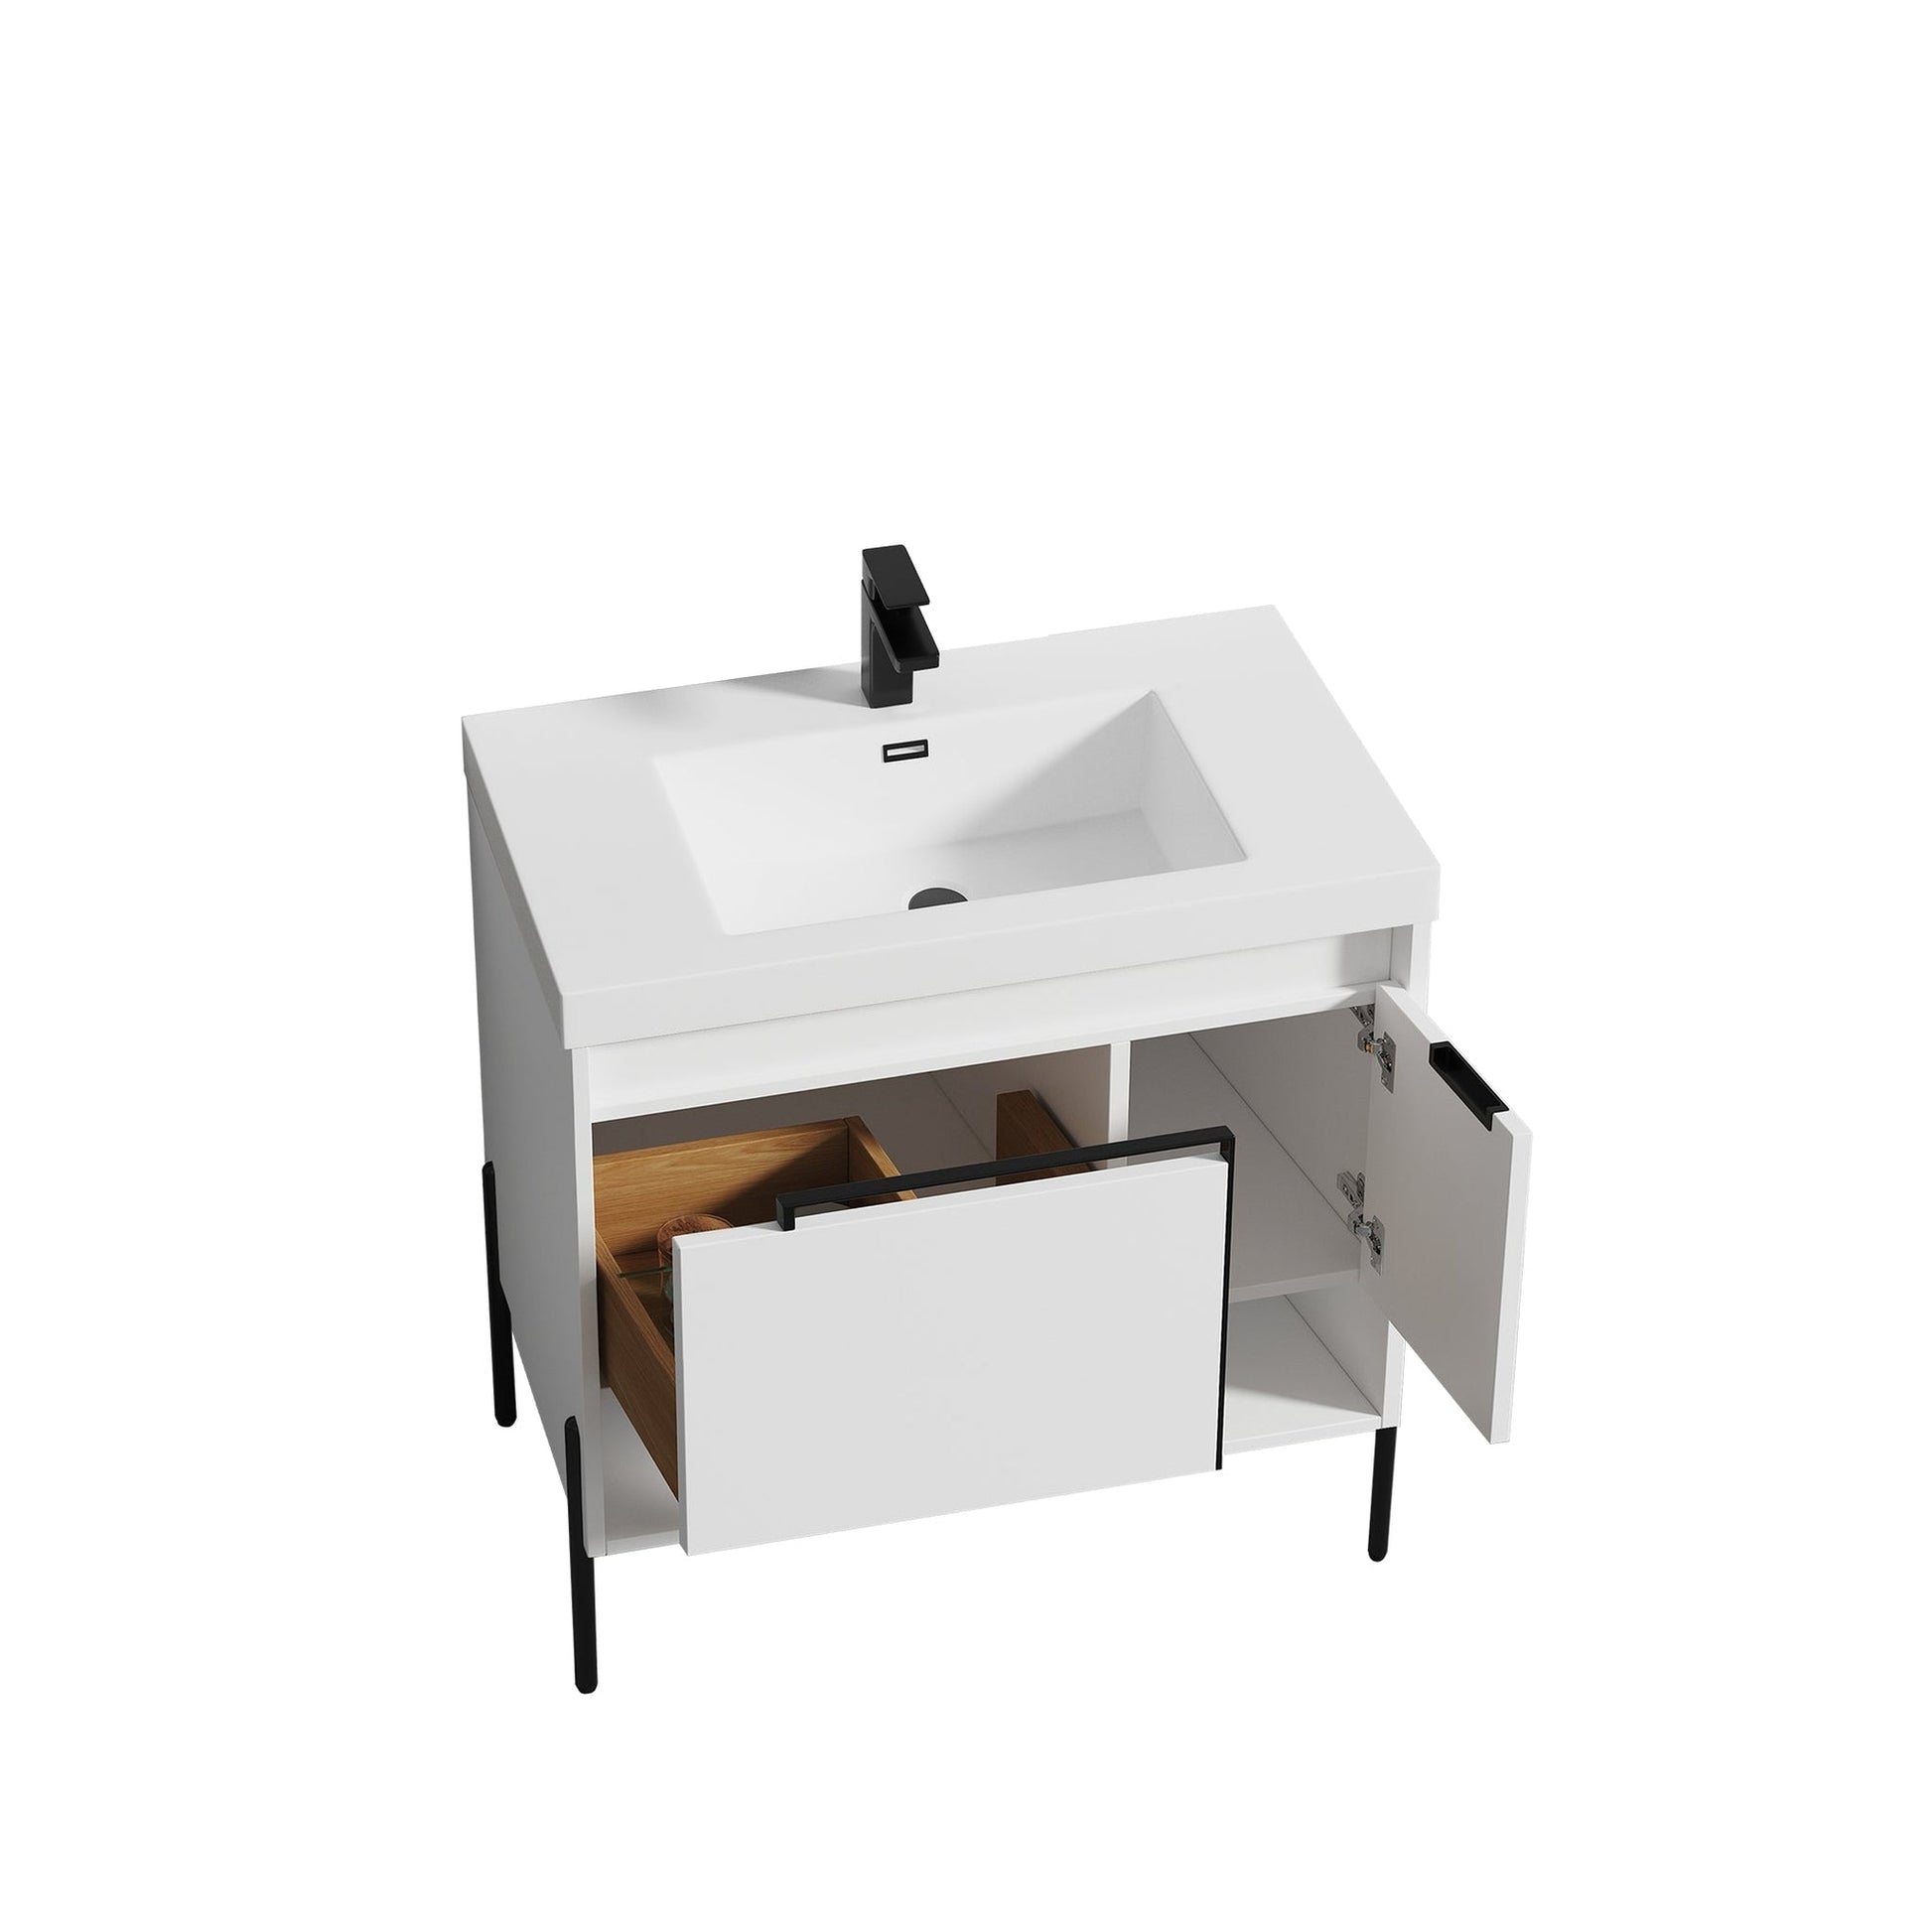 Blossom Turin 36" 1-Door 1-Drawer Matte White Freestanding Single Vanity Base With Open Shelf, Handle and Legs